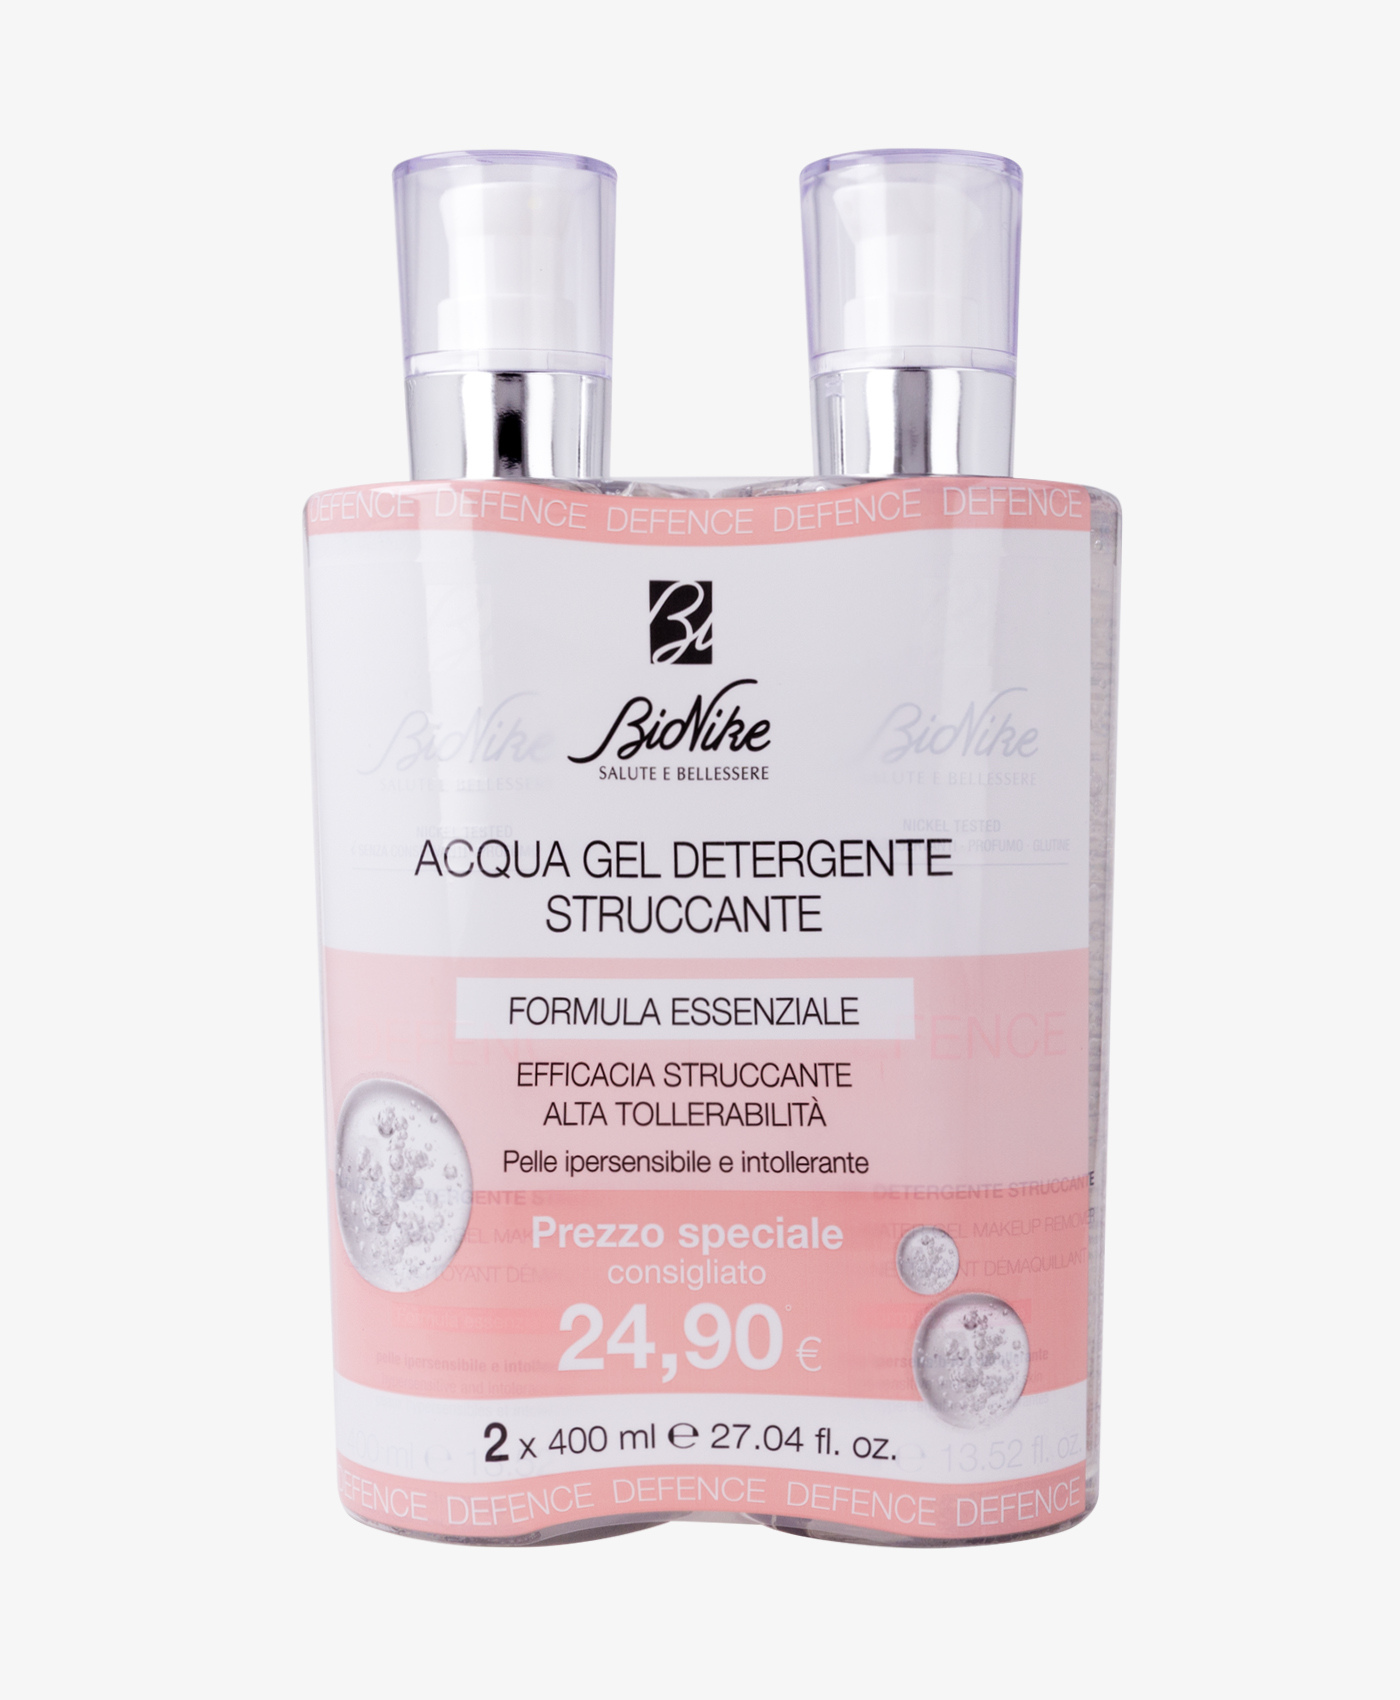 Cleansing Water-Gel Makeup Remover Dual-Pack - BioNike - Sito Ufficiale